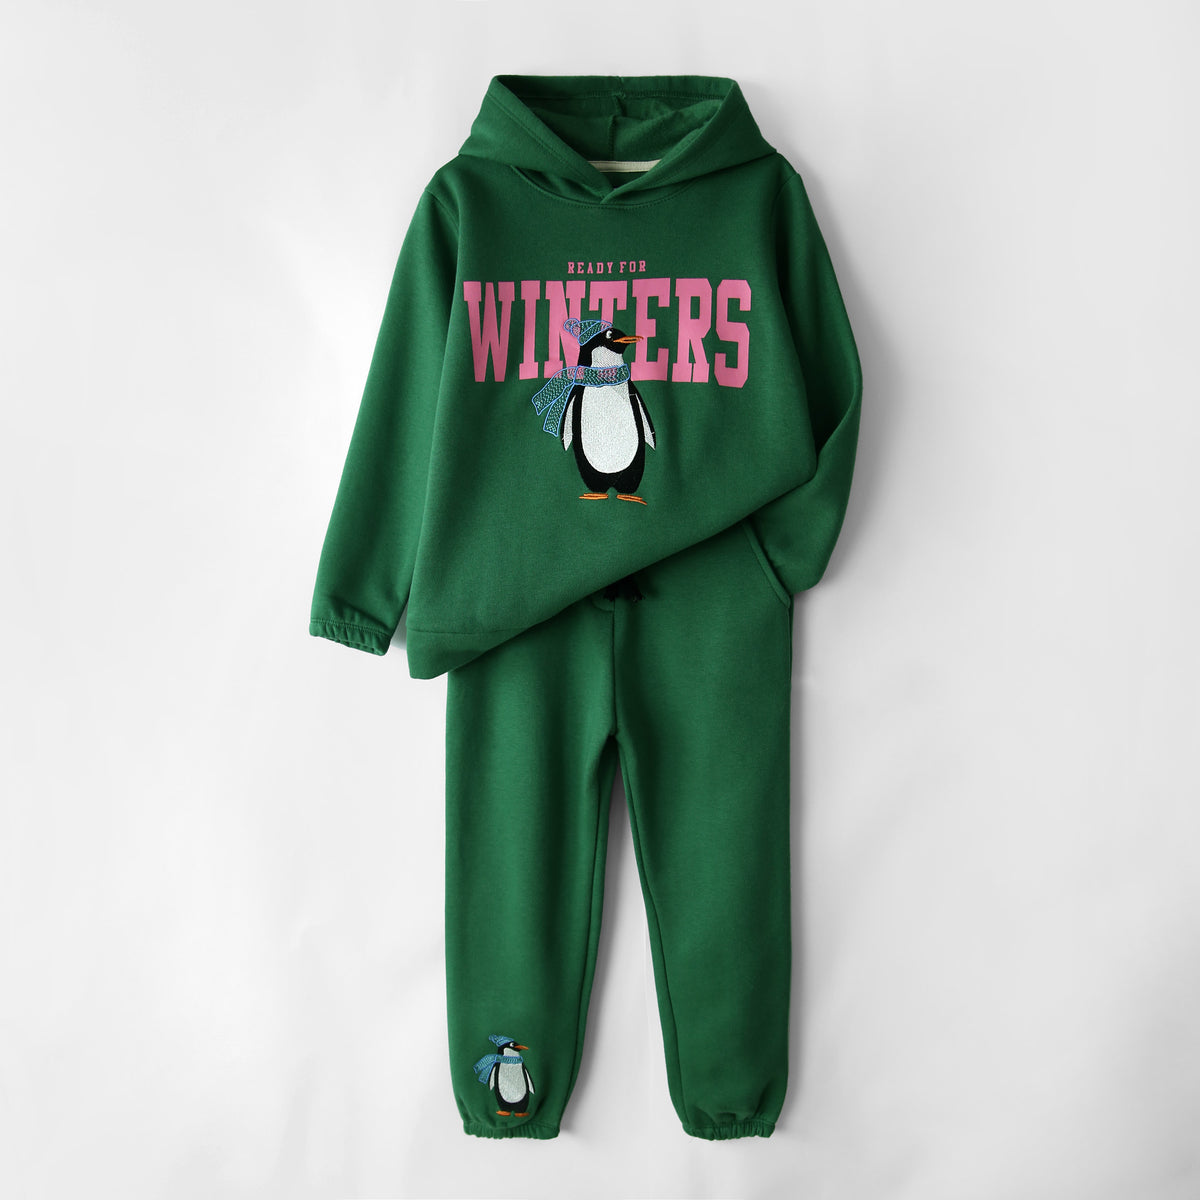 Premium Quality Embroidered Fleece Green Tracksuit For Girls